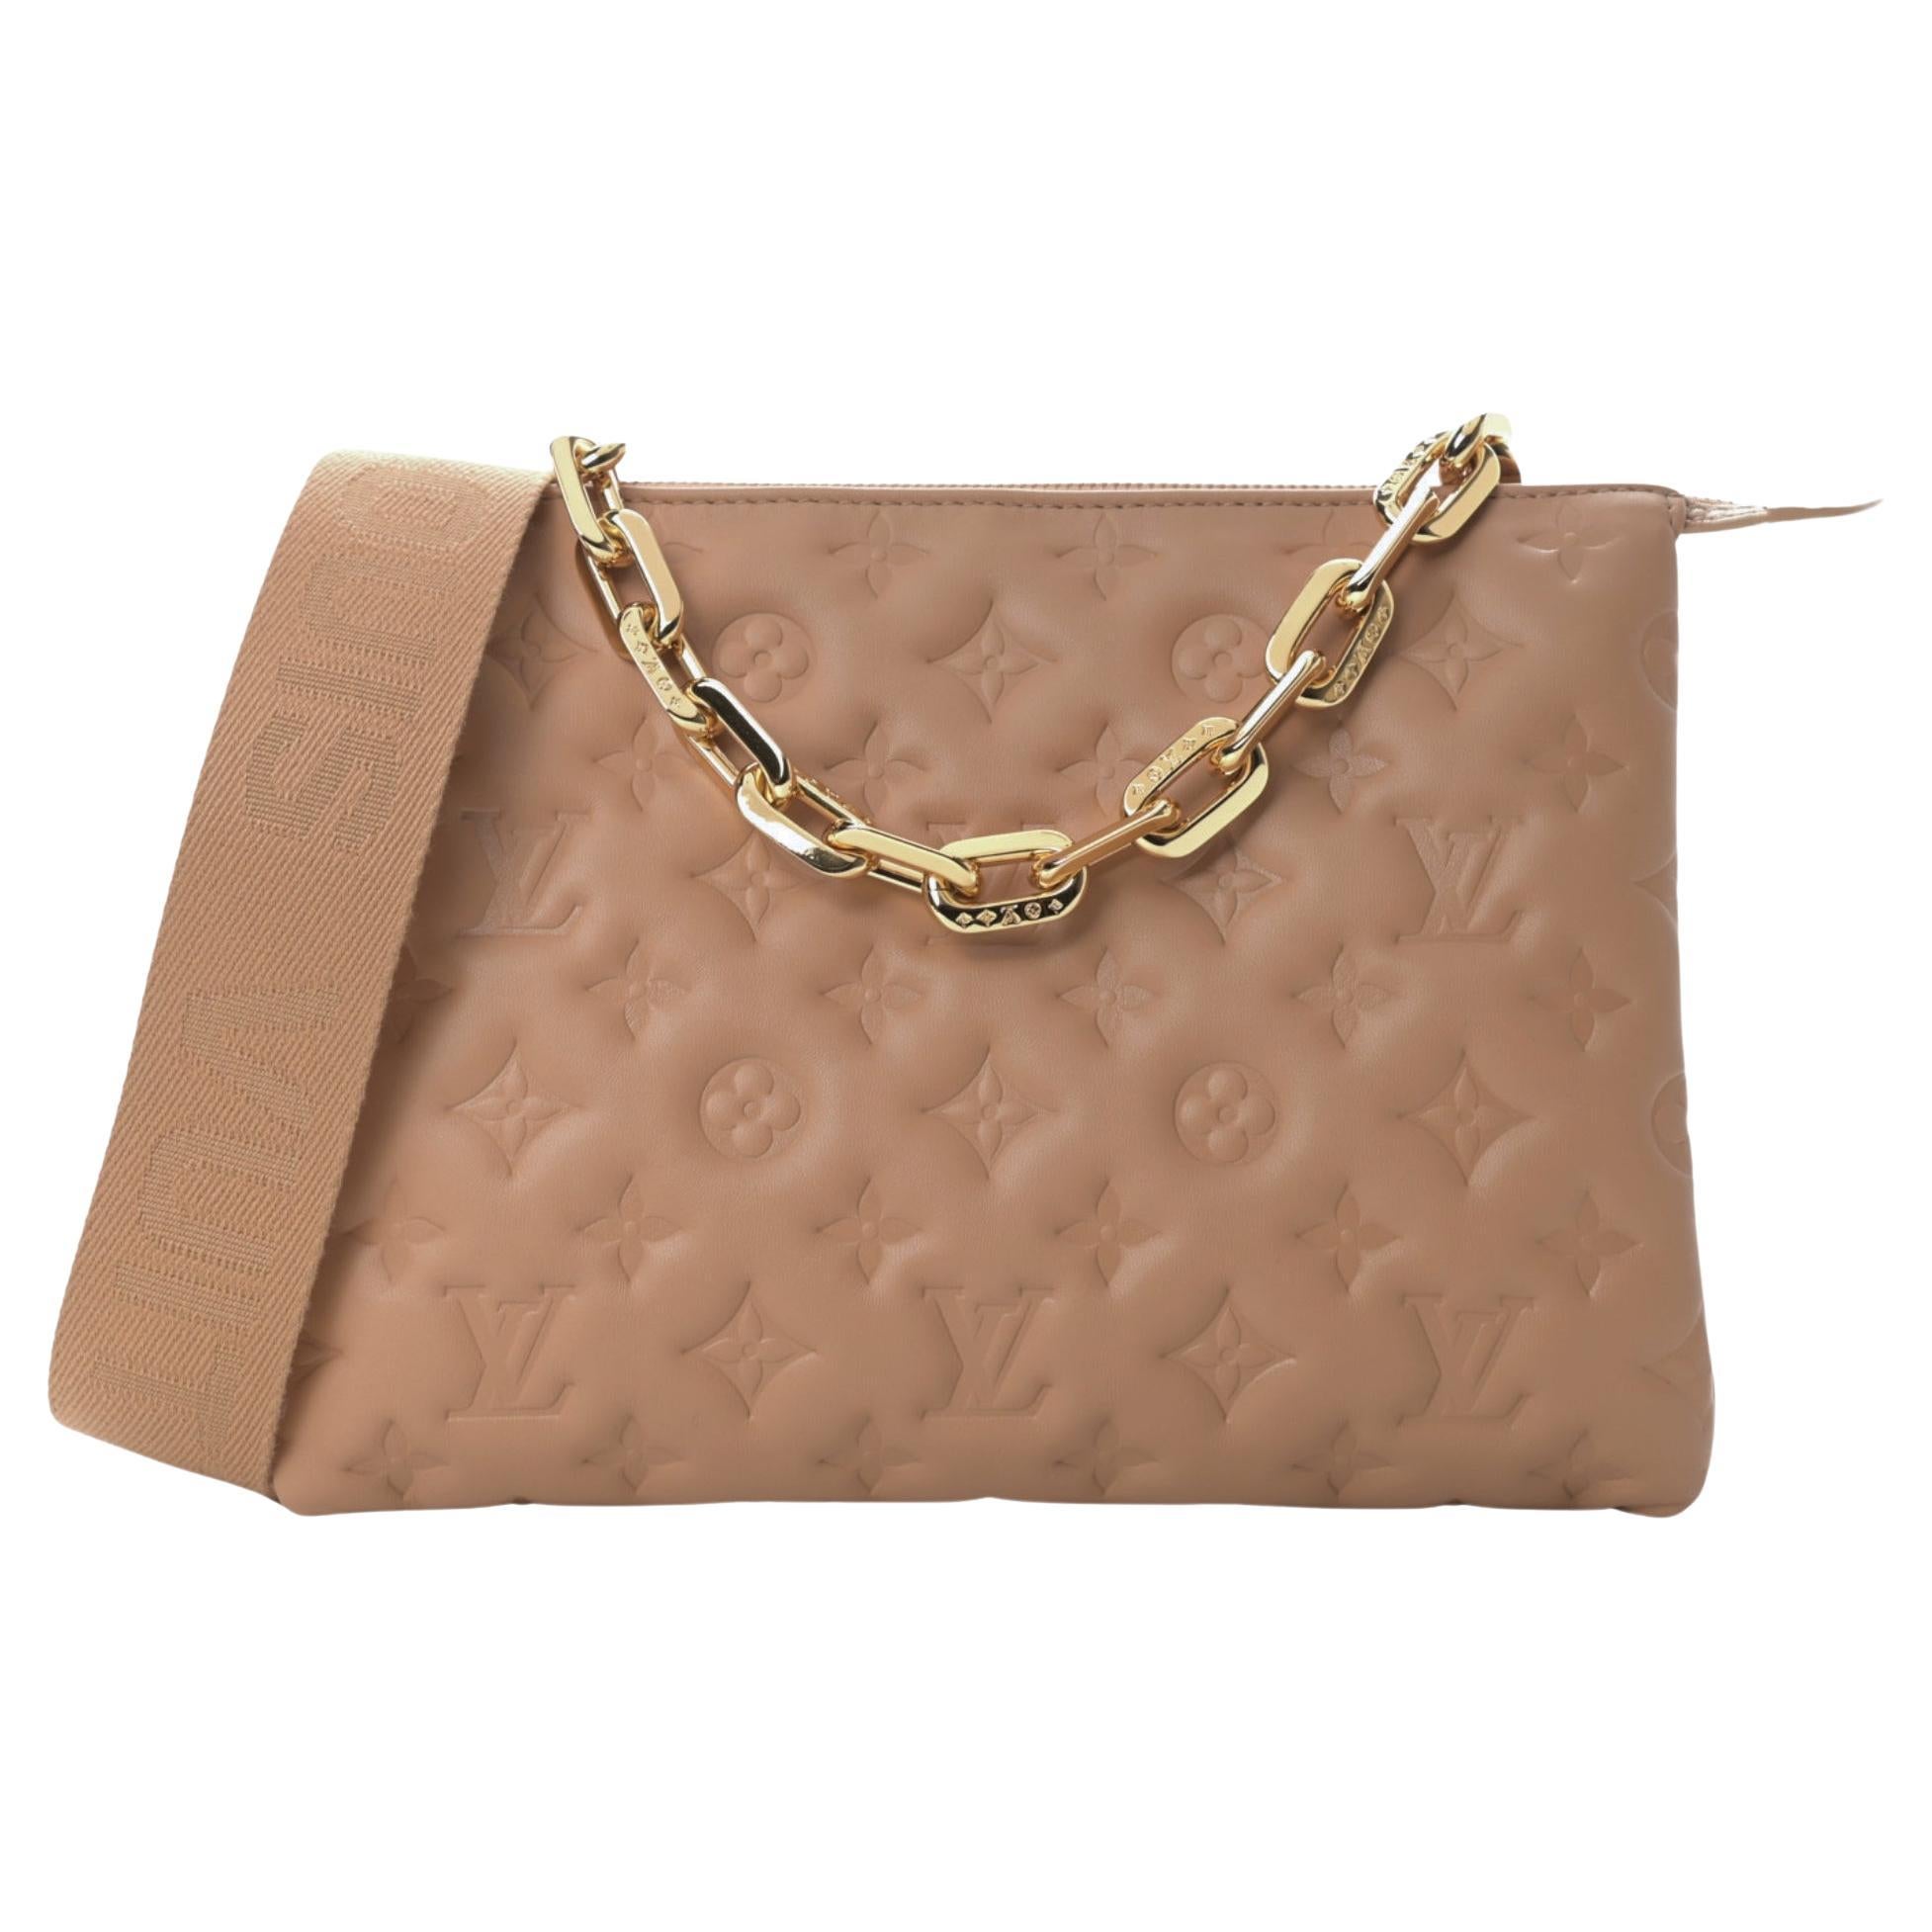 Louis Vuitton Camel Lambskin Embossed Monogram Coussin PM Bag For Sale